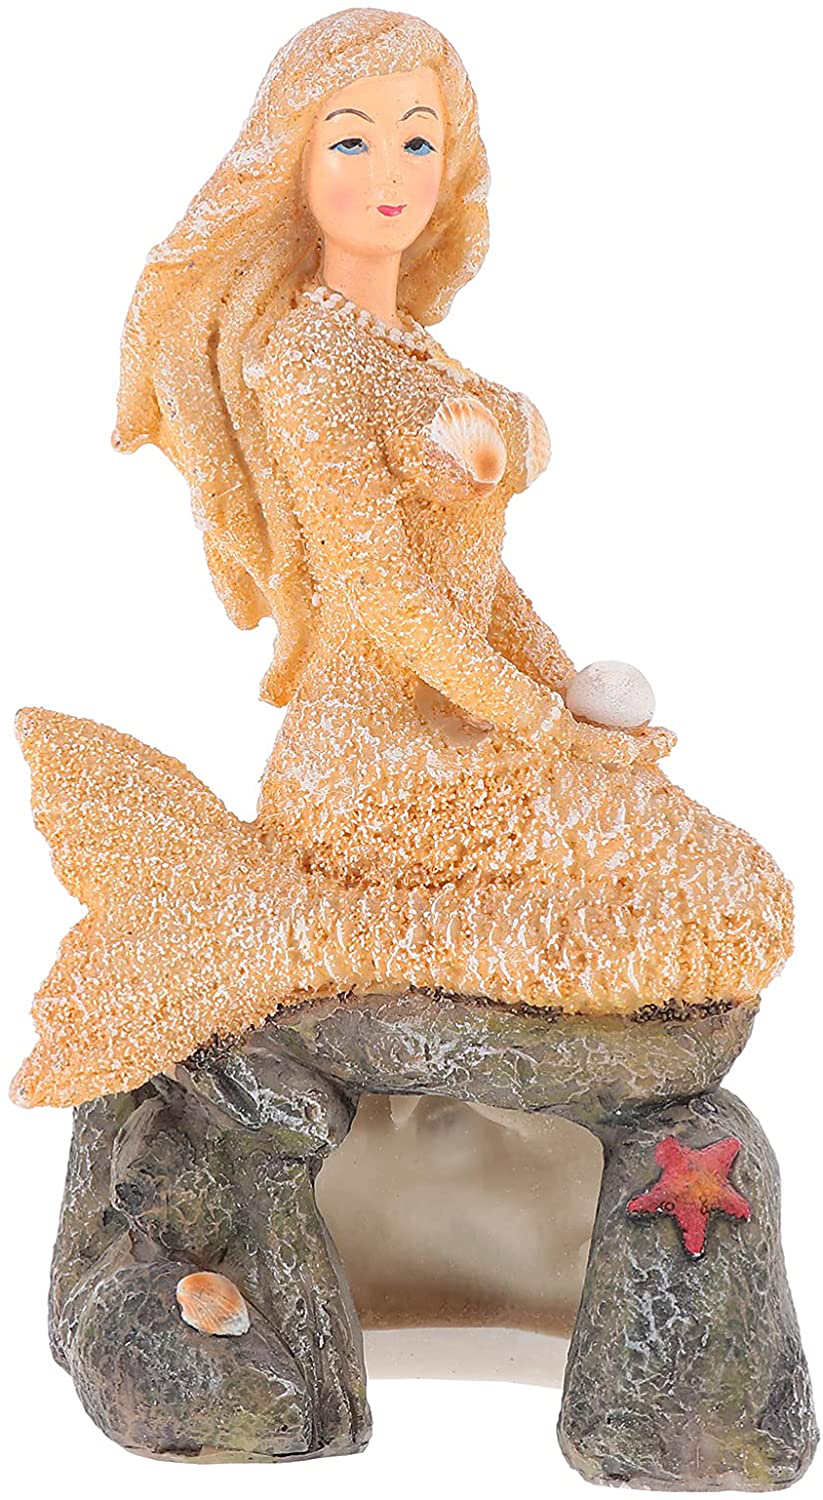 NUOBESTY Aquarium Mermaid Statue Mermaid Sitting on Rock under the Sea Collectible Home Fish Tank Sculpture Resin Lawn Mermaid Figure Ornament for Fairy Garden Fish Tank Decoration Animals & Pet Supplies > Pet Supplies > Fish Supplies > Aquarium Decor NUOBESTY   